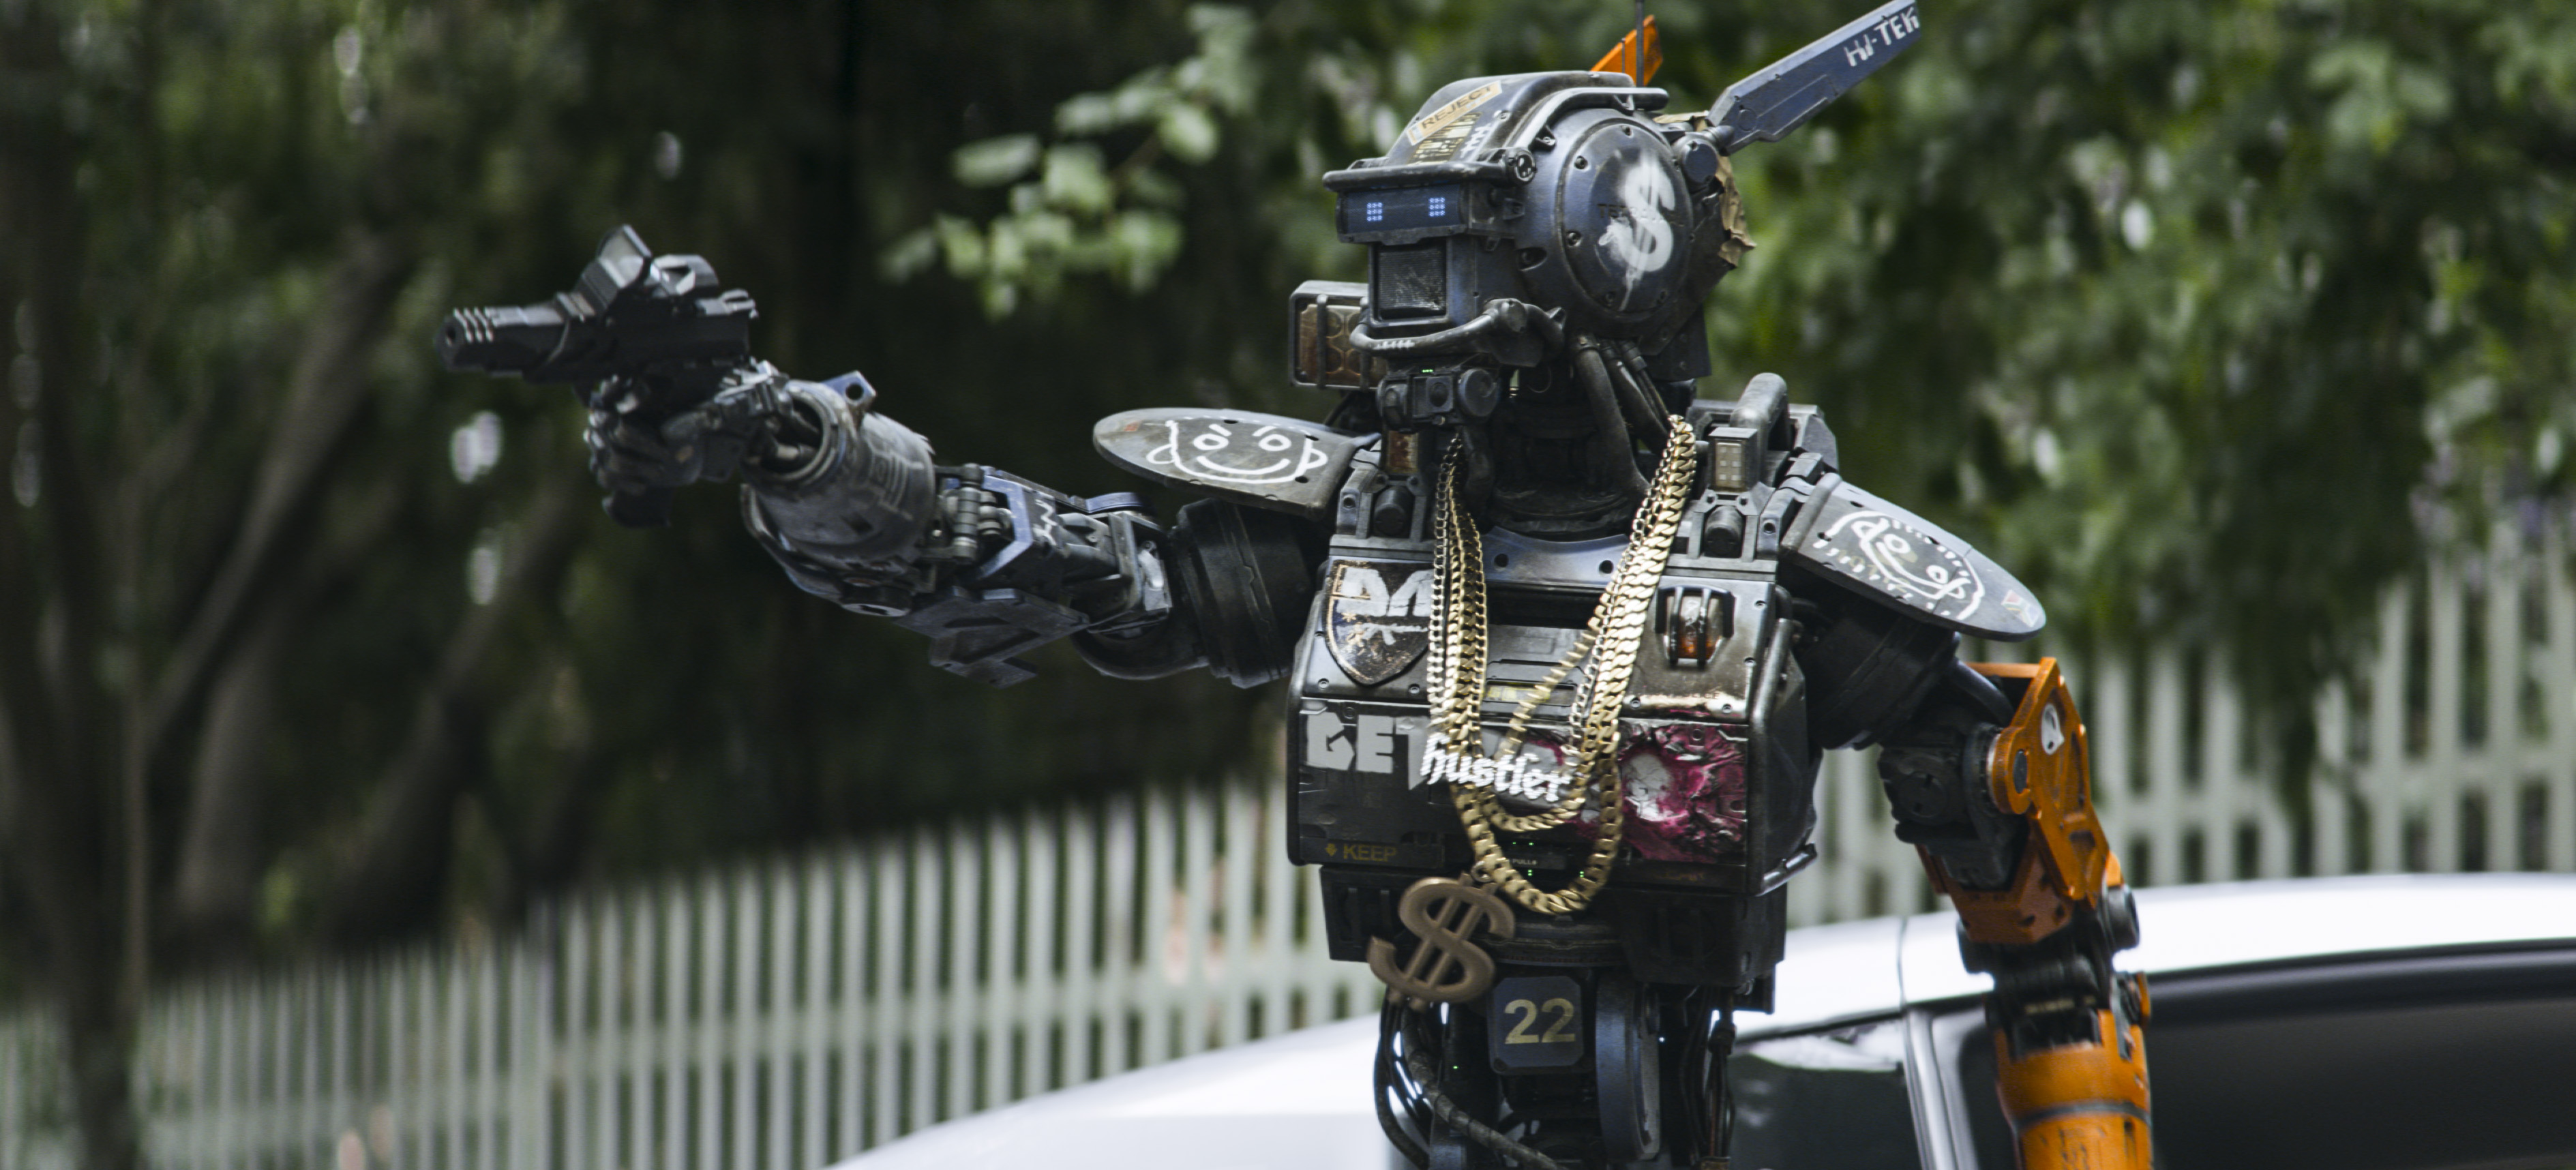 ***SUNDAY CALENDAR STORY FOR JANUARY 11, 2014. DO NOT USE PRIOR TO PUBLICATION**********Chappie (Sharlto Copley) from Columbia Pictures' action-adventure movie CHAPPIE.